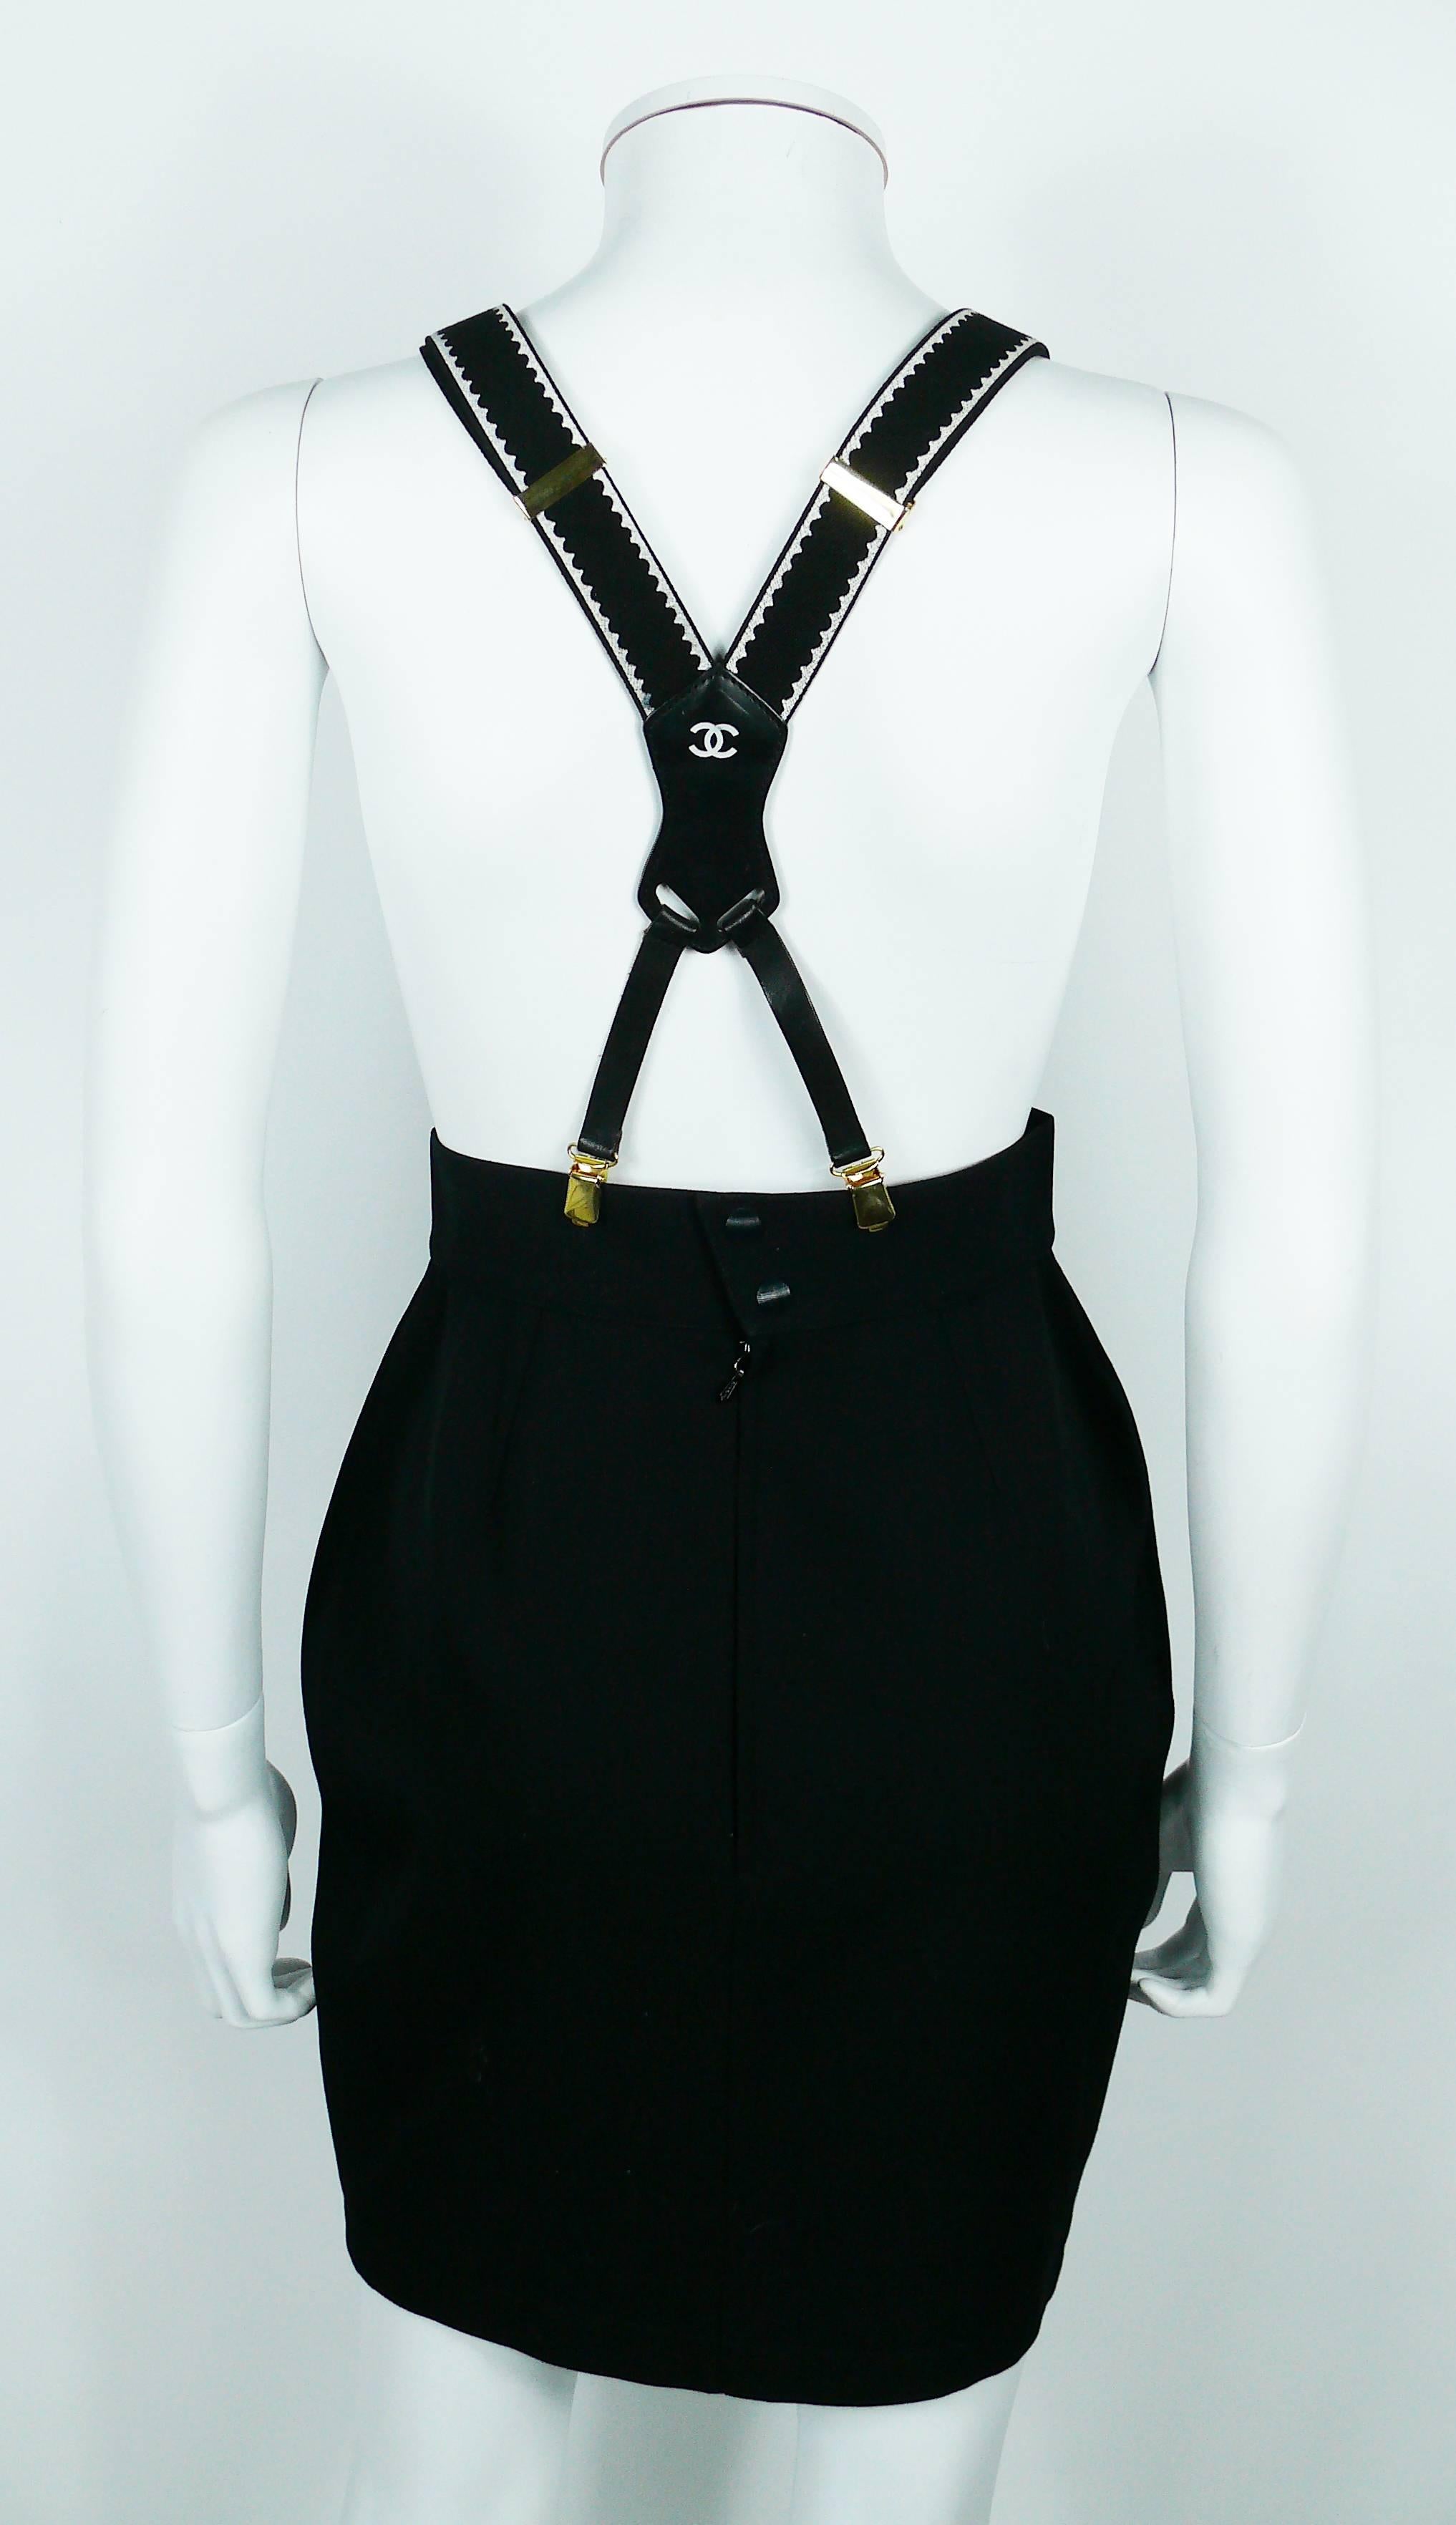 Chanel Vintage Iconic Rare Black and White Suspenders 2